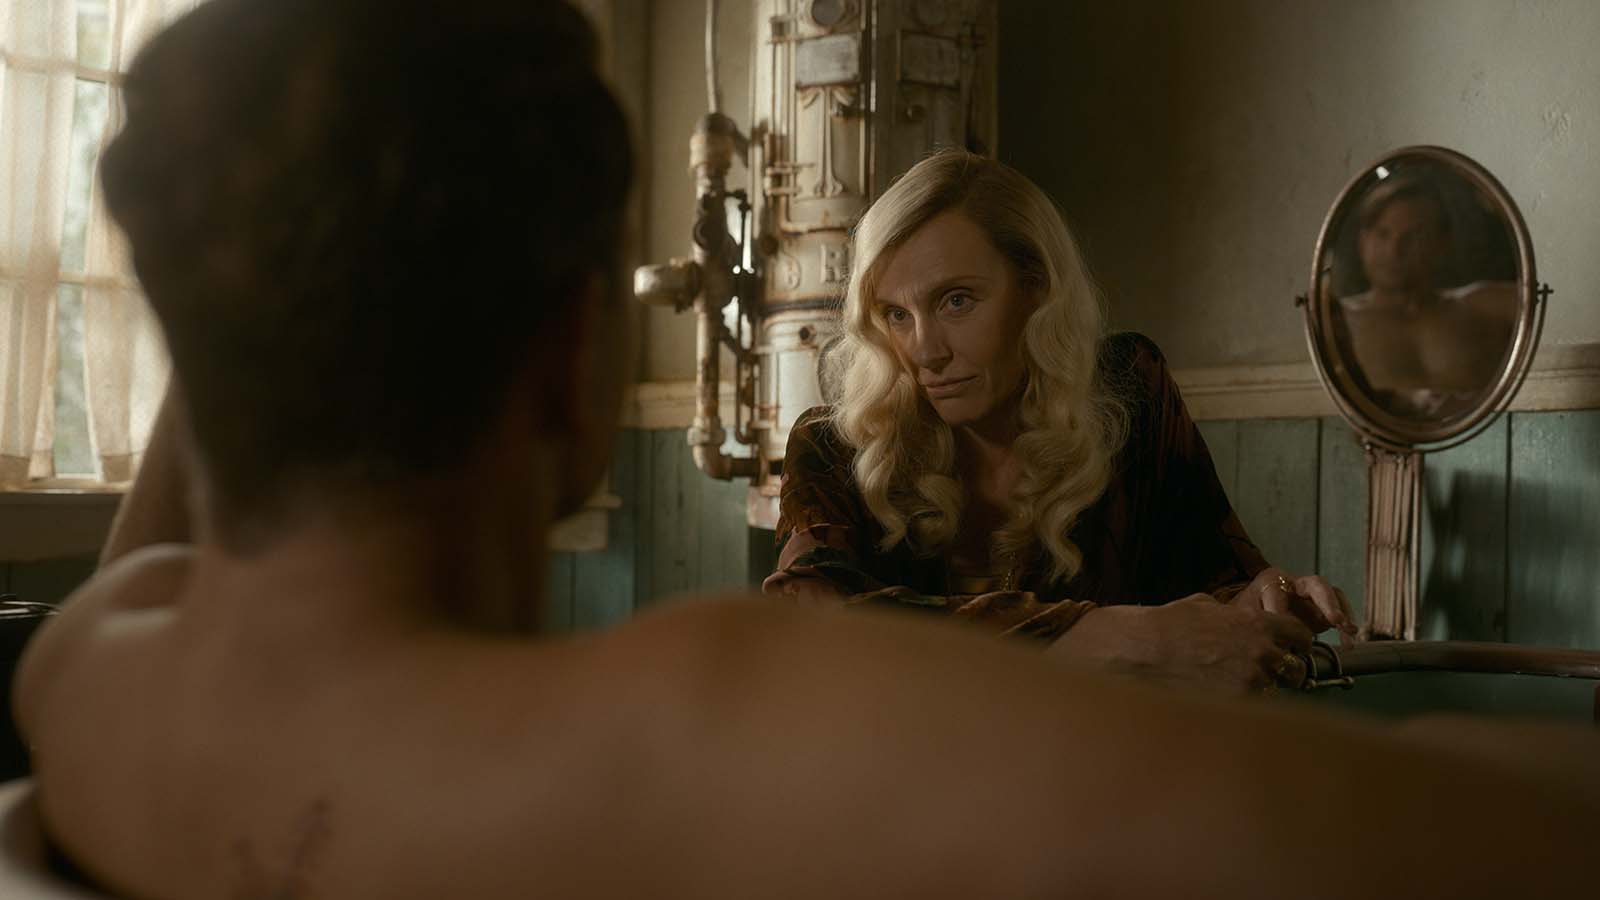 Toni Collette as Zeena the Seer in Nightmare Alley. Image © Searchlight Pictures